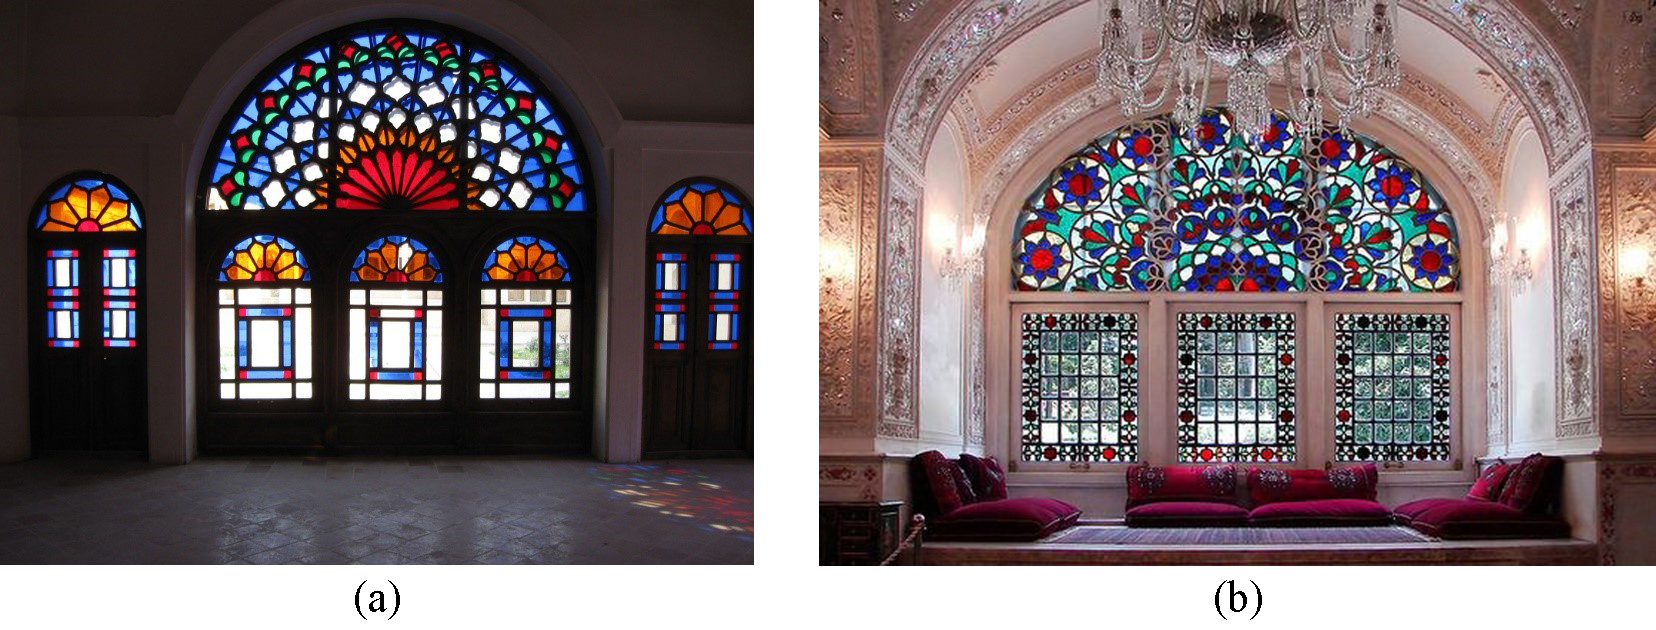 Orosi window in Iranian traditional architecture (a) Tabatabaei House [14] and (b) Saheb Gharanieh Palace [15].